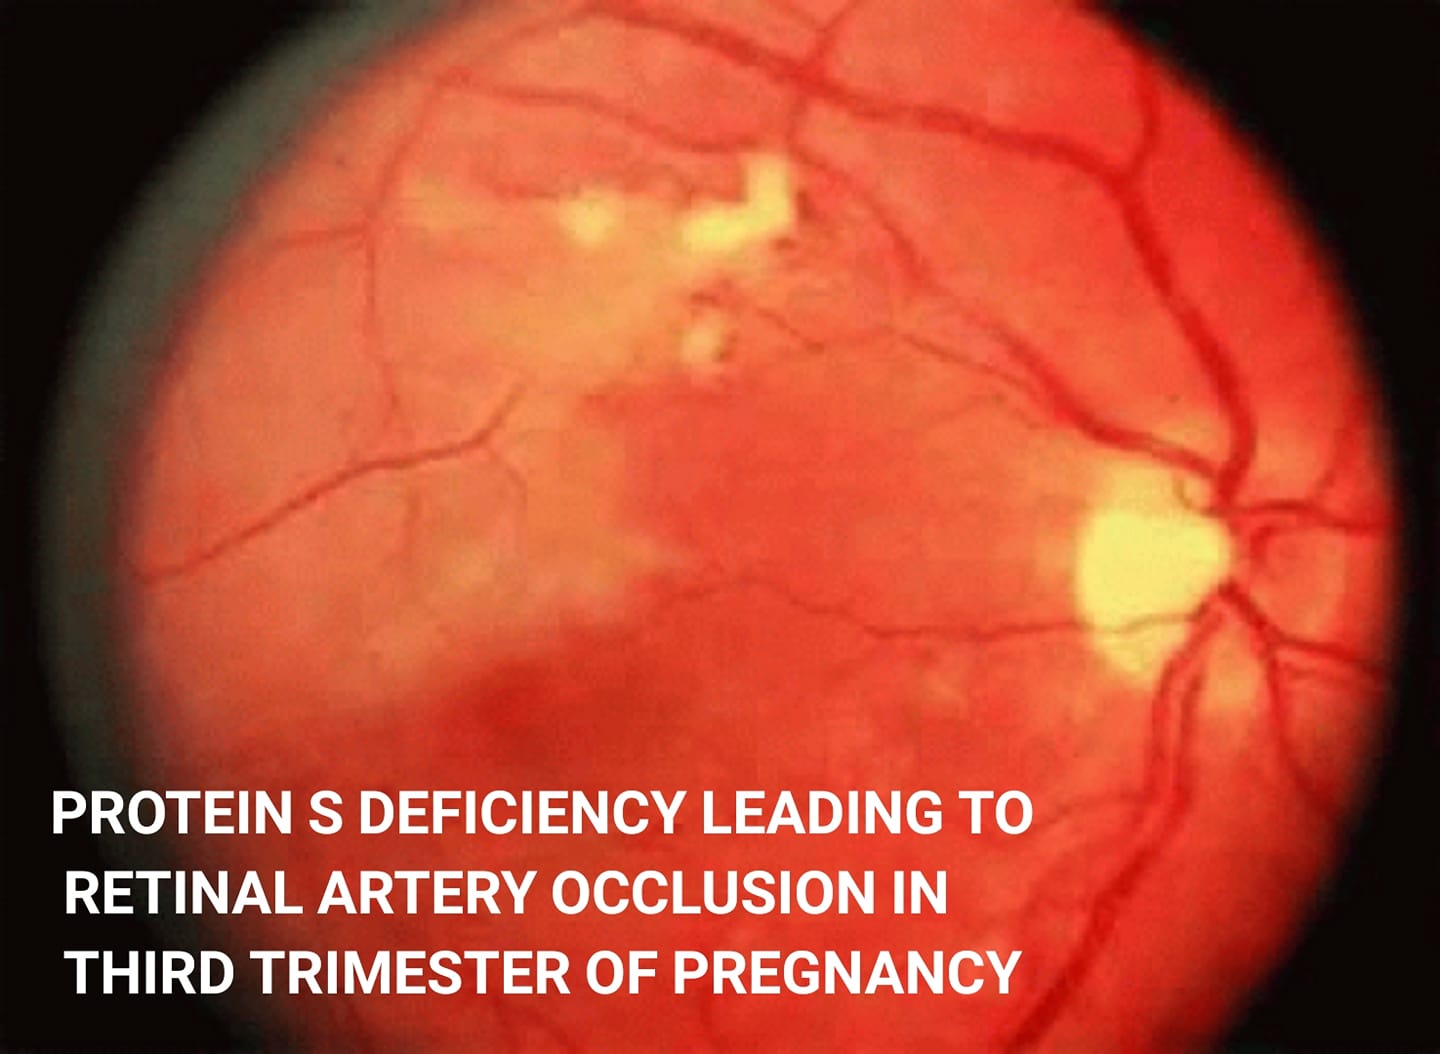 Proteins deficiency leading to retinal artery occlusion in third trimester